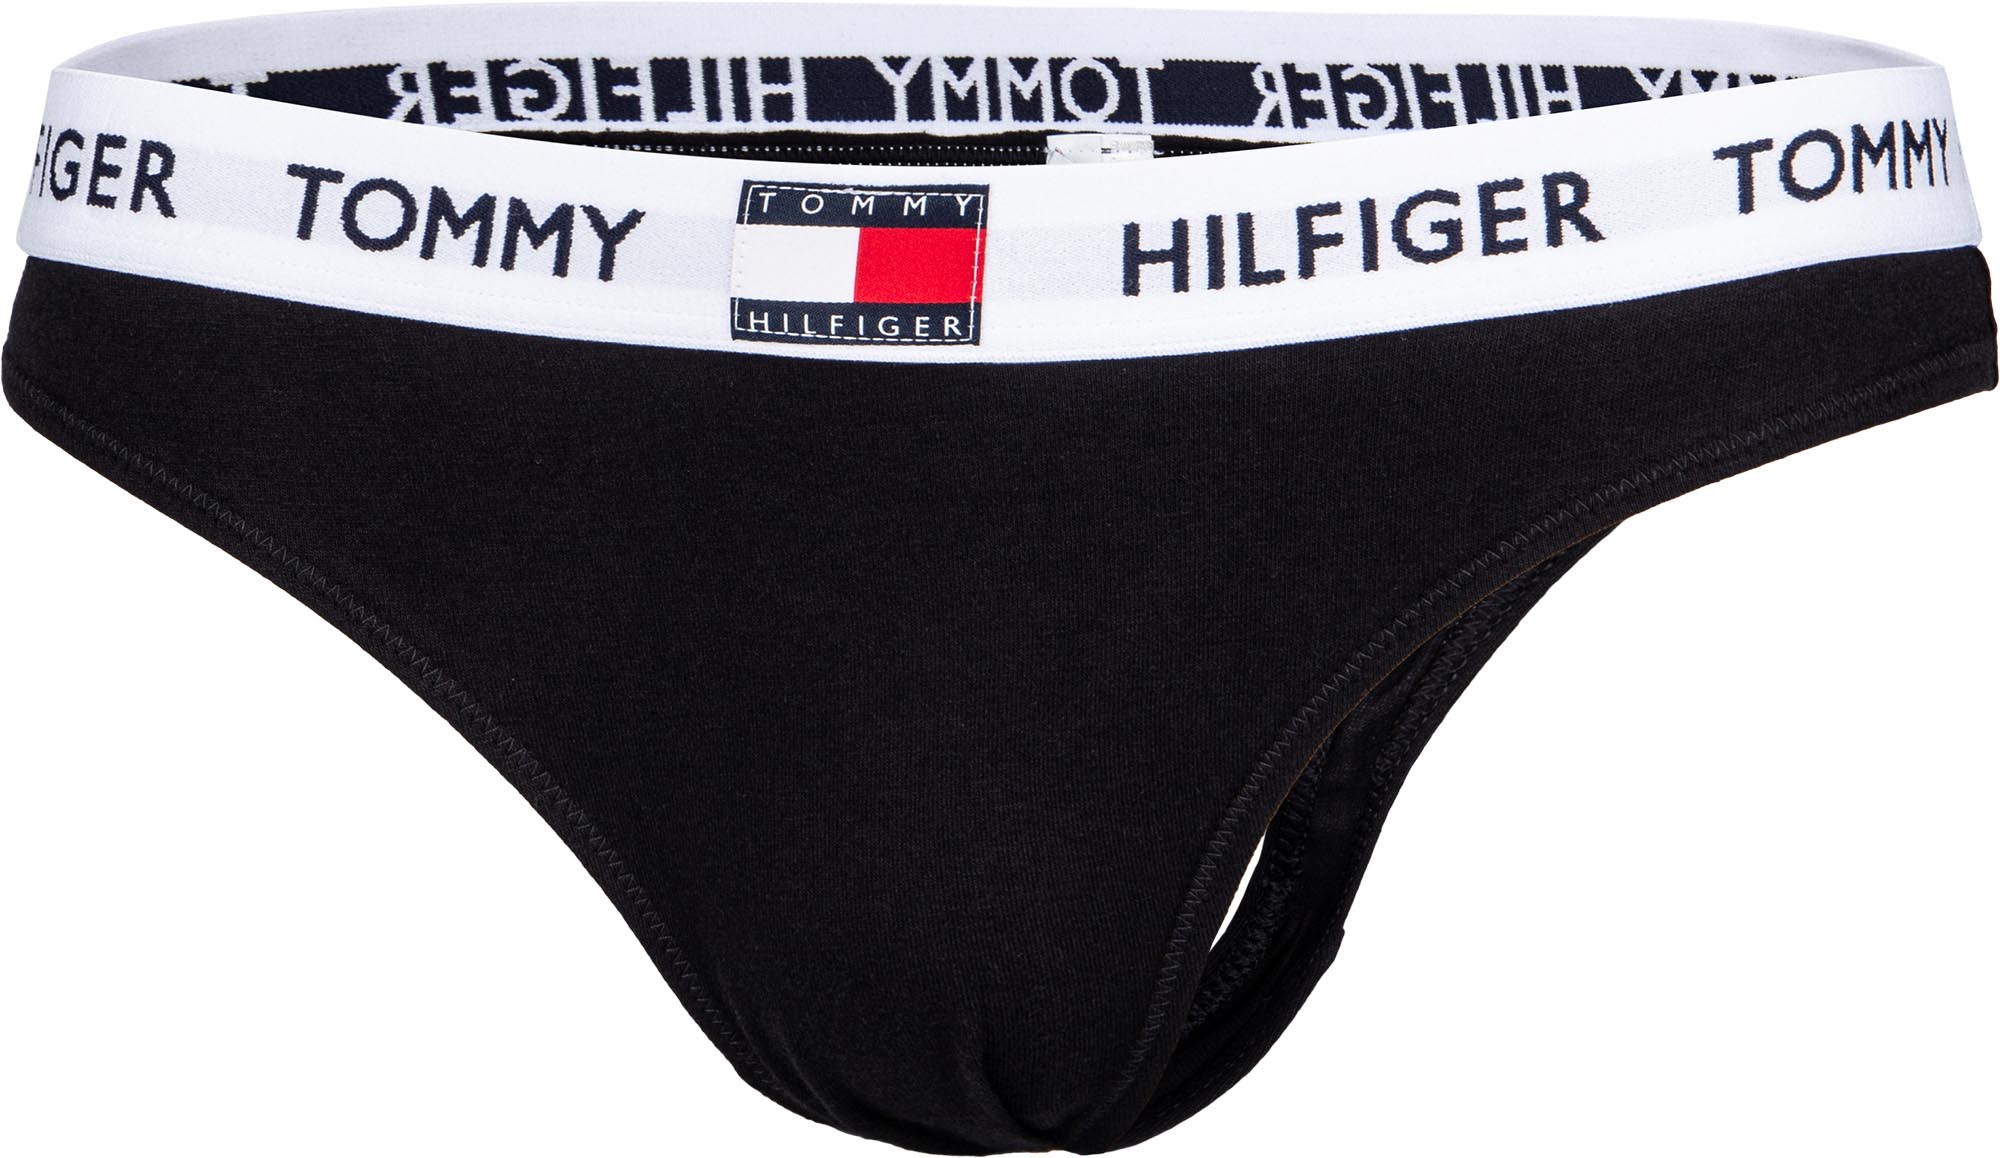 https://i.sportisimo.com/products/images/1159/1159421/full/tommy-hilfiger-thong_0.jpg